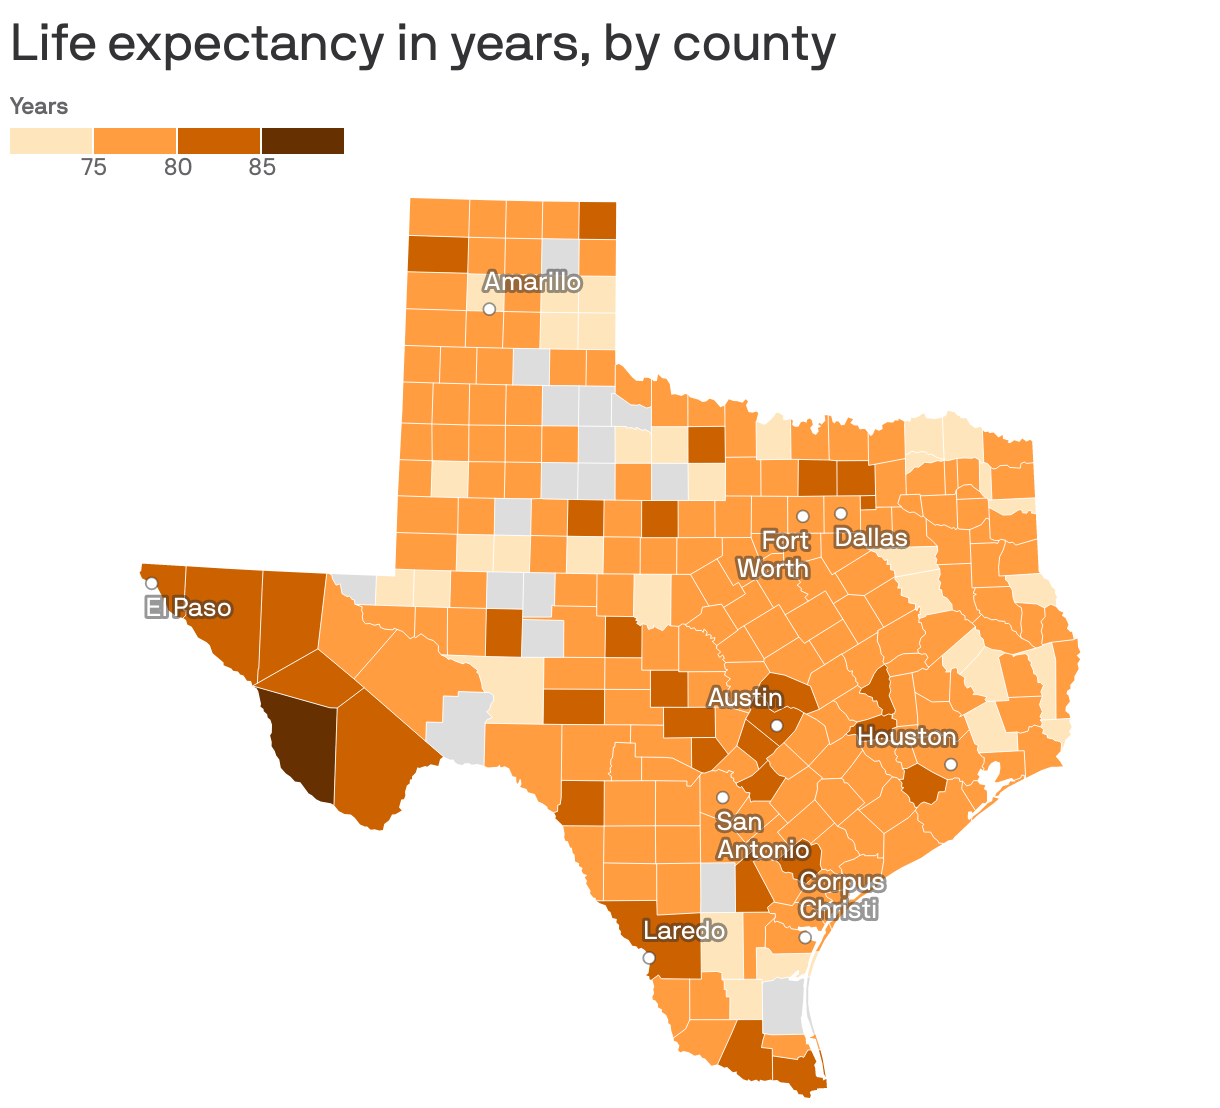 Life expectancy in years, by county